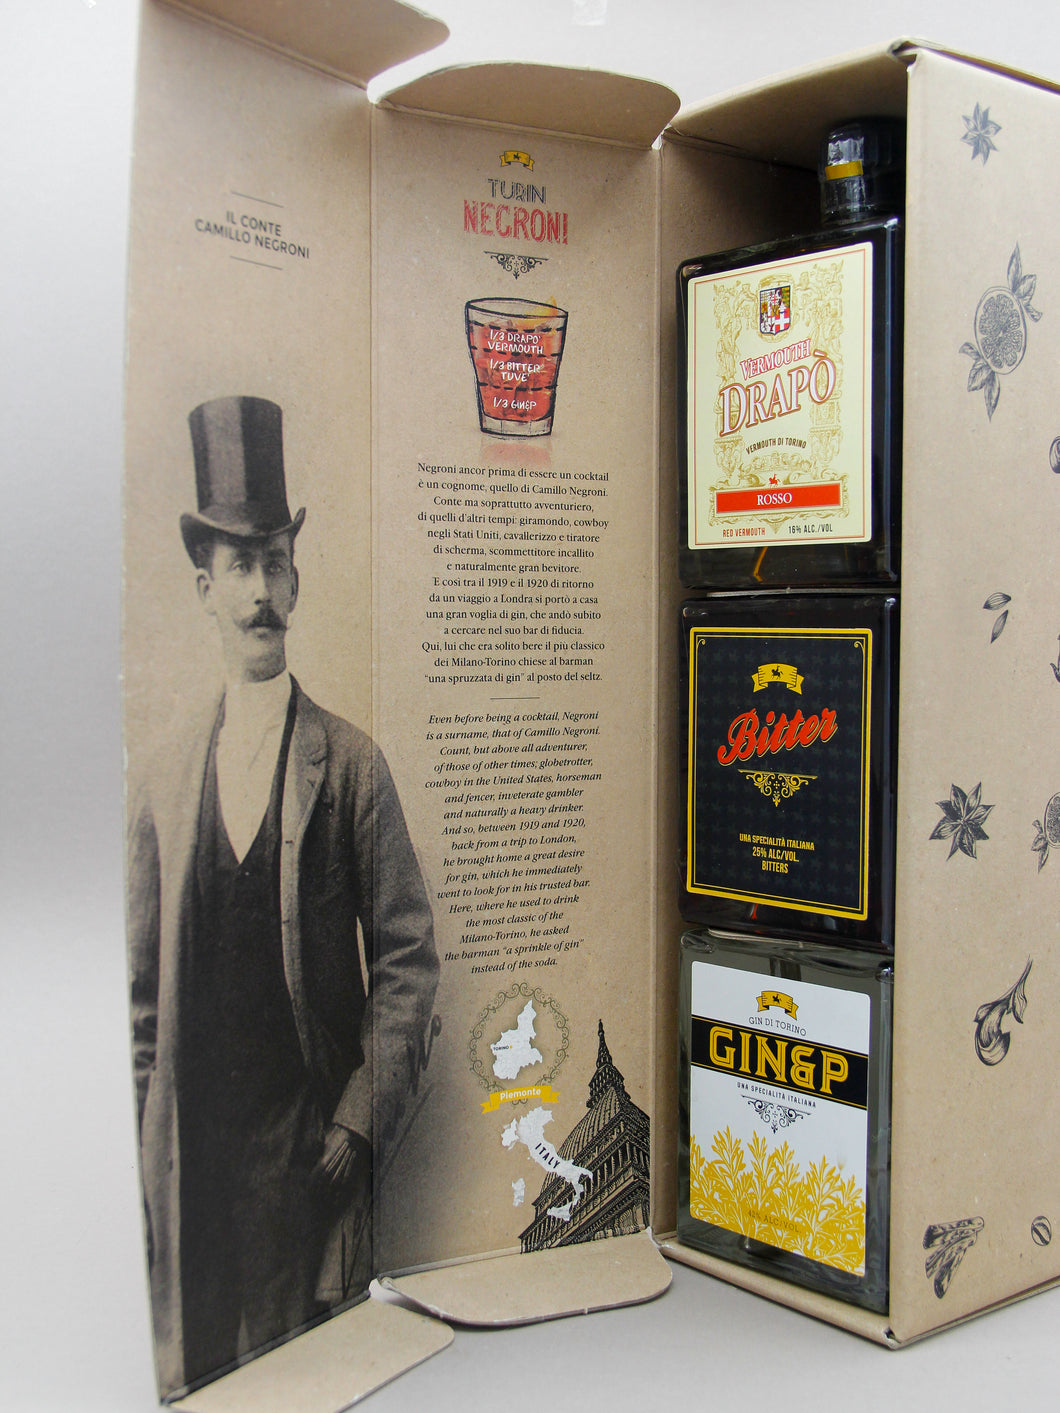 Turin Negroni Gift Set - Gin&P Gin (42%, 50cl), Drapo Rosso Vermouth (16%, 50cl), Tuve Bitter (25%, 50cl)